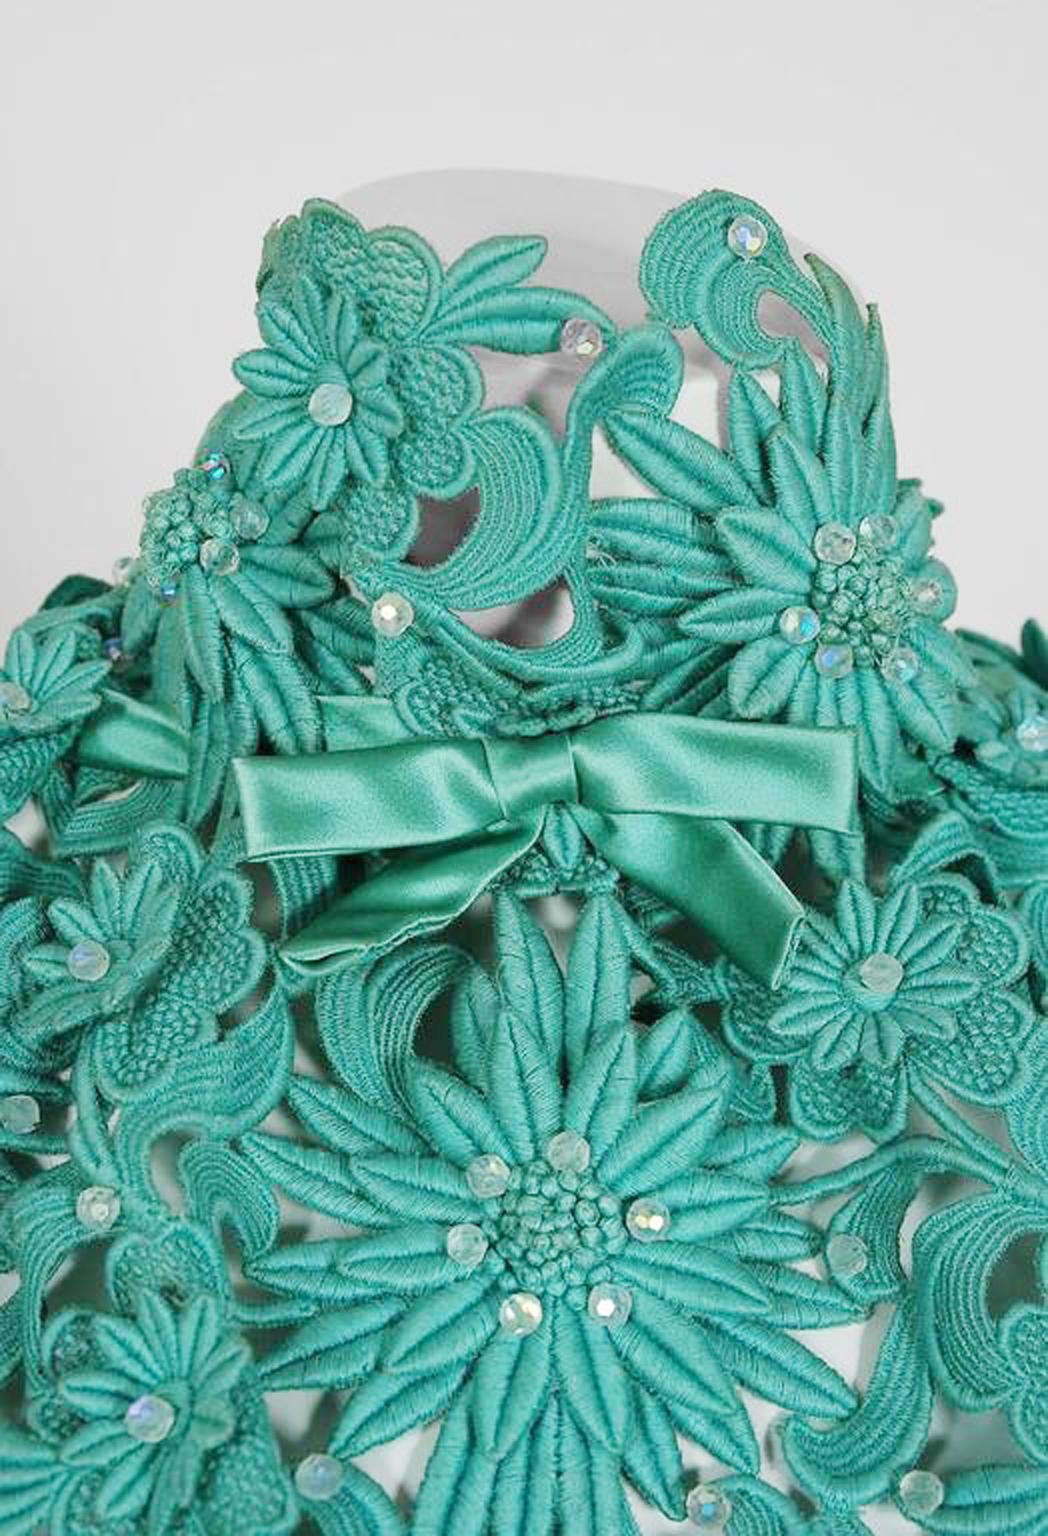 Women's Vintage 1962 Nina Ricci Couture Seafoam Blue Green Beaded Lace Satin Fitted Gown